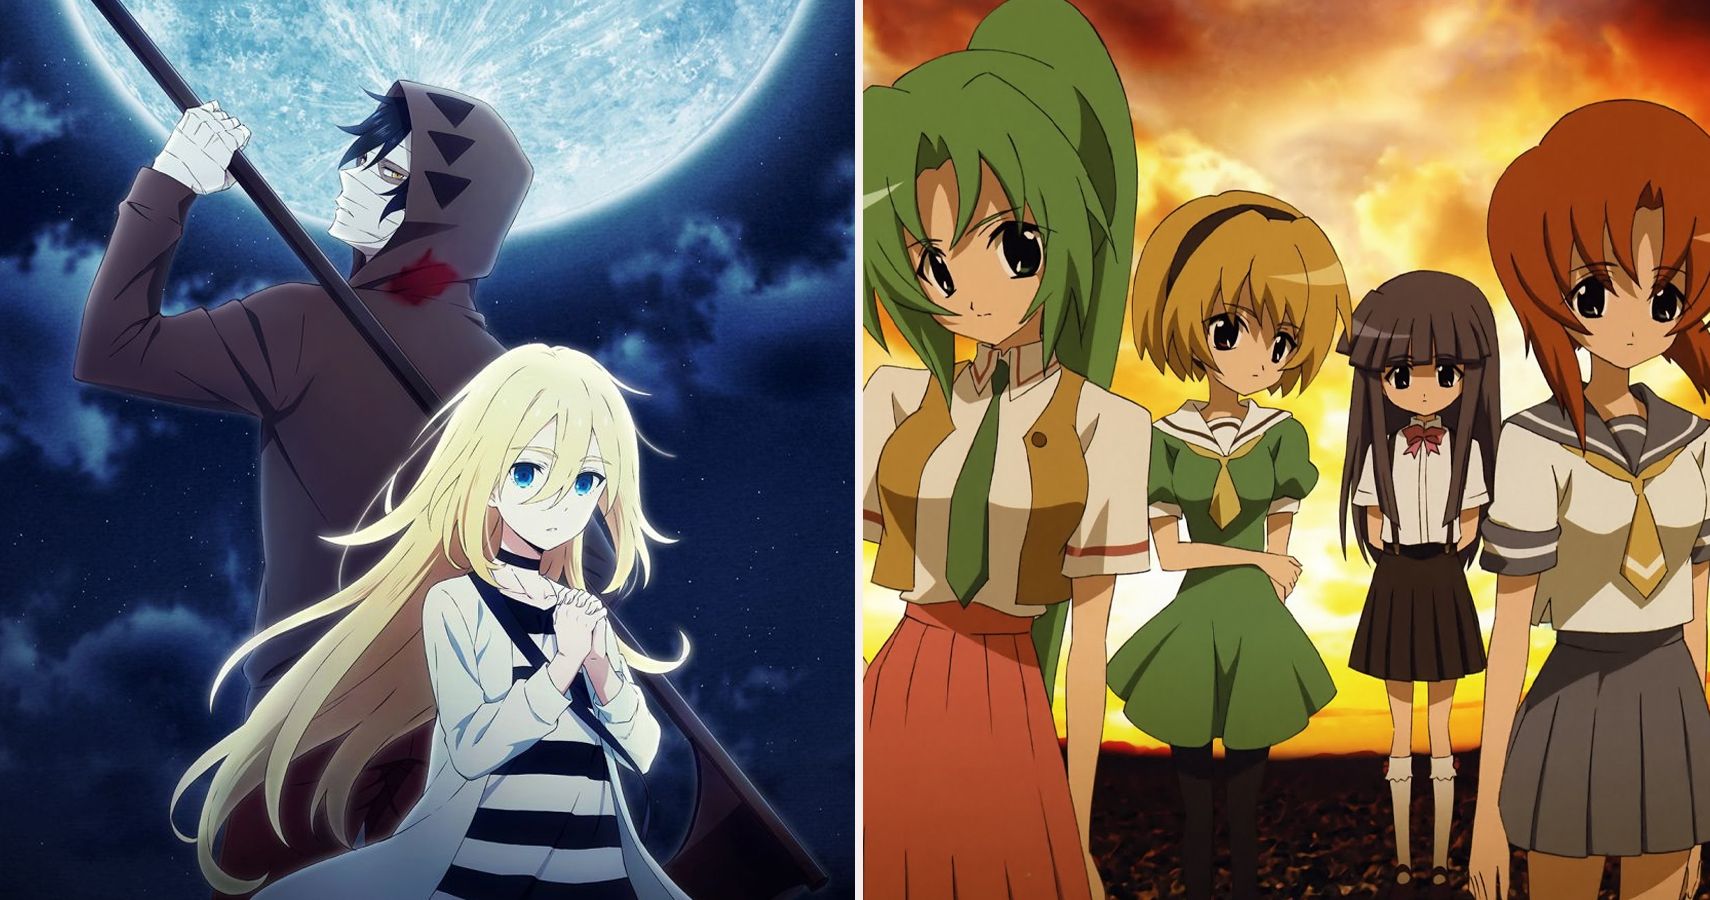 Most horror anime isn't really horror, even when it scares us